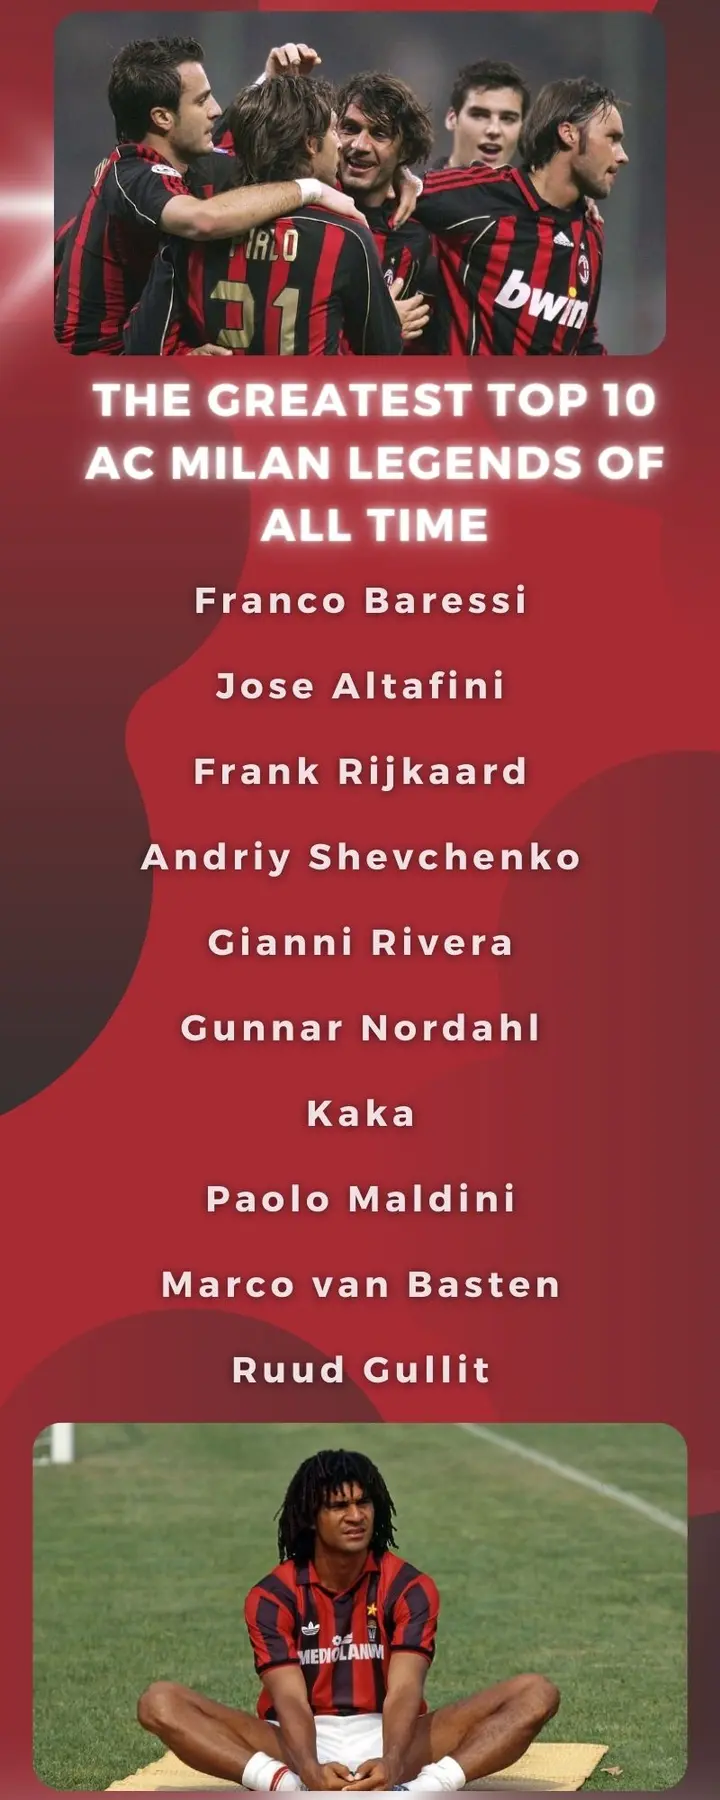 The greatest top AC Milan legends of all time